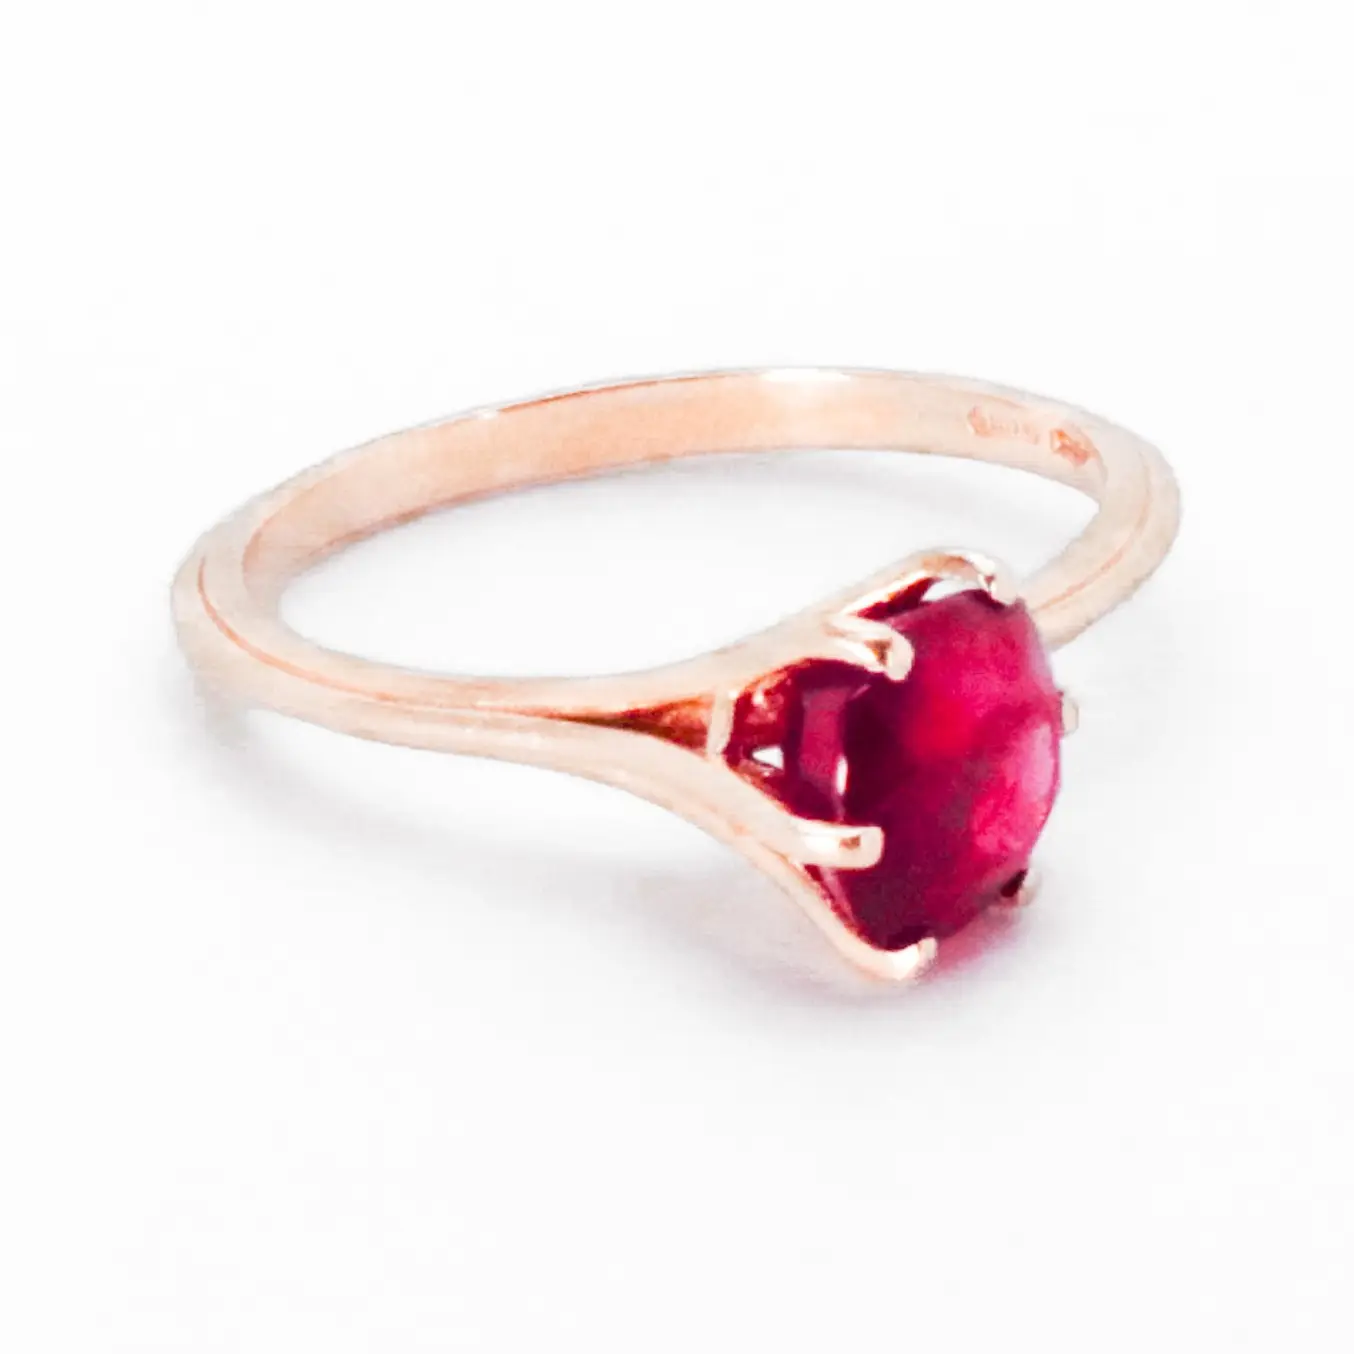 Made in Italy Fine Jewelry 2 32 cts Heated Fine Burma Ruby 18kt Rose Gold Stackable Asymmetrical Fantasy Ethereal Cocktail Ring